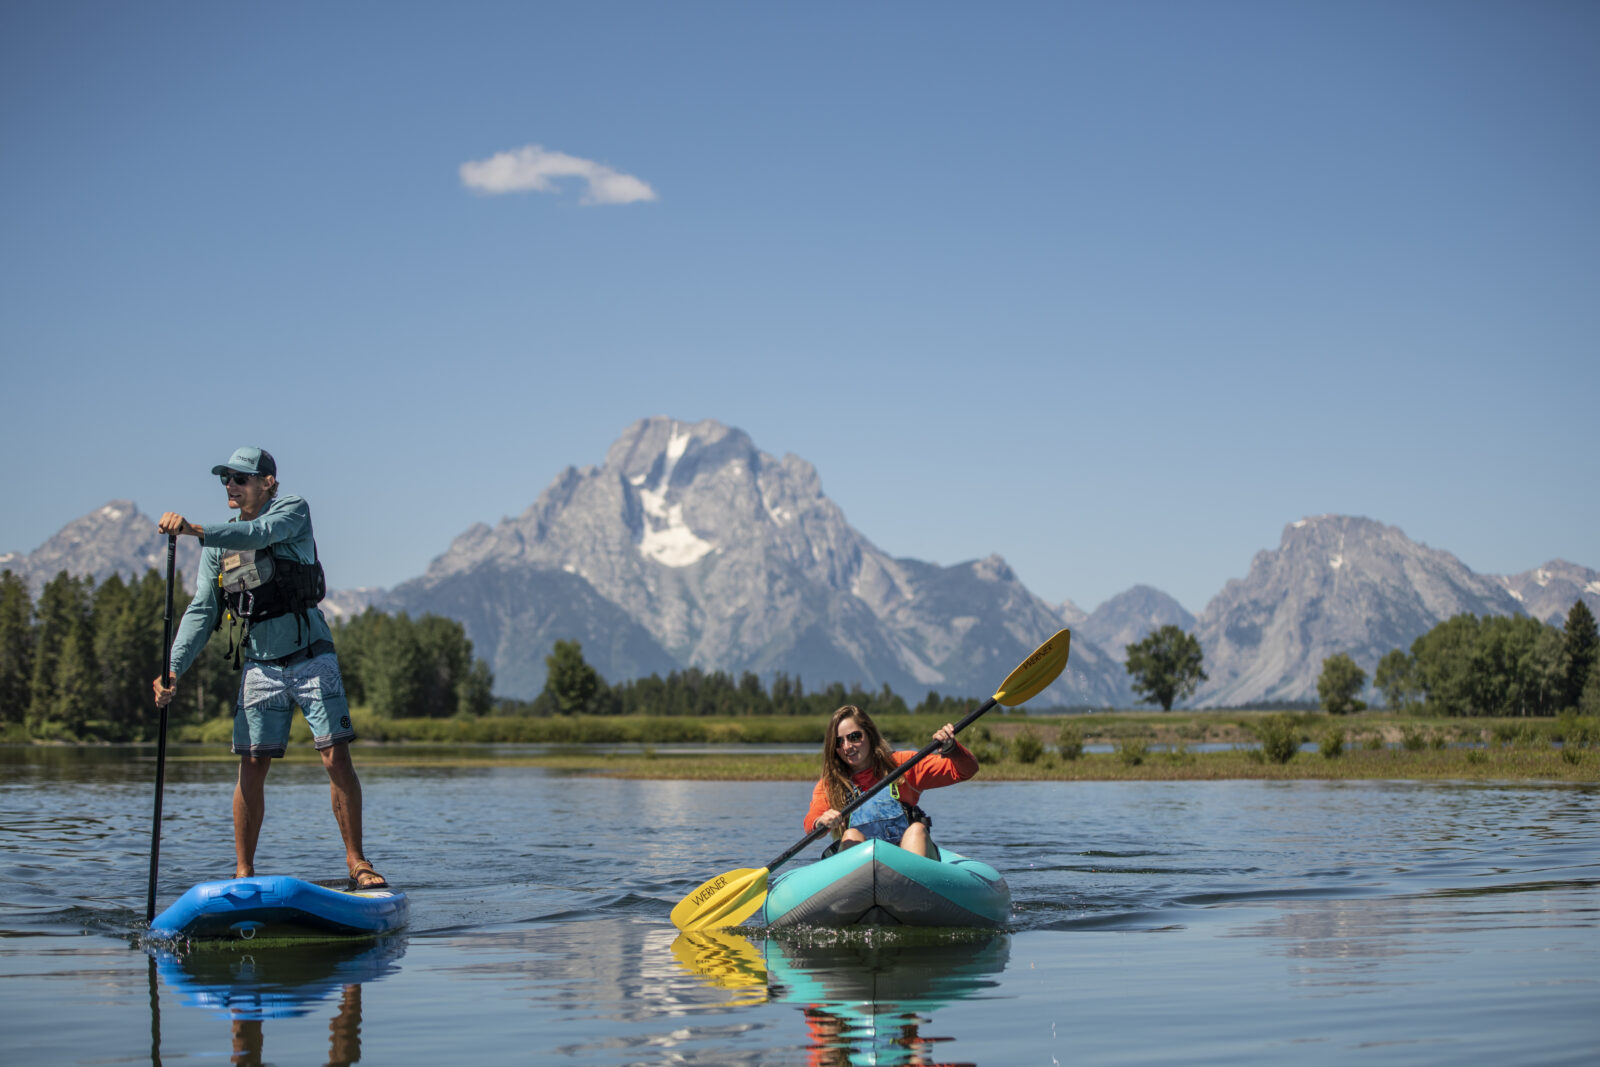 Stand up paddle boarding near Oxbow Bend.